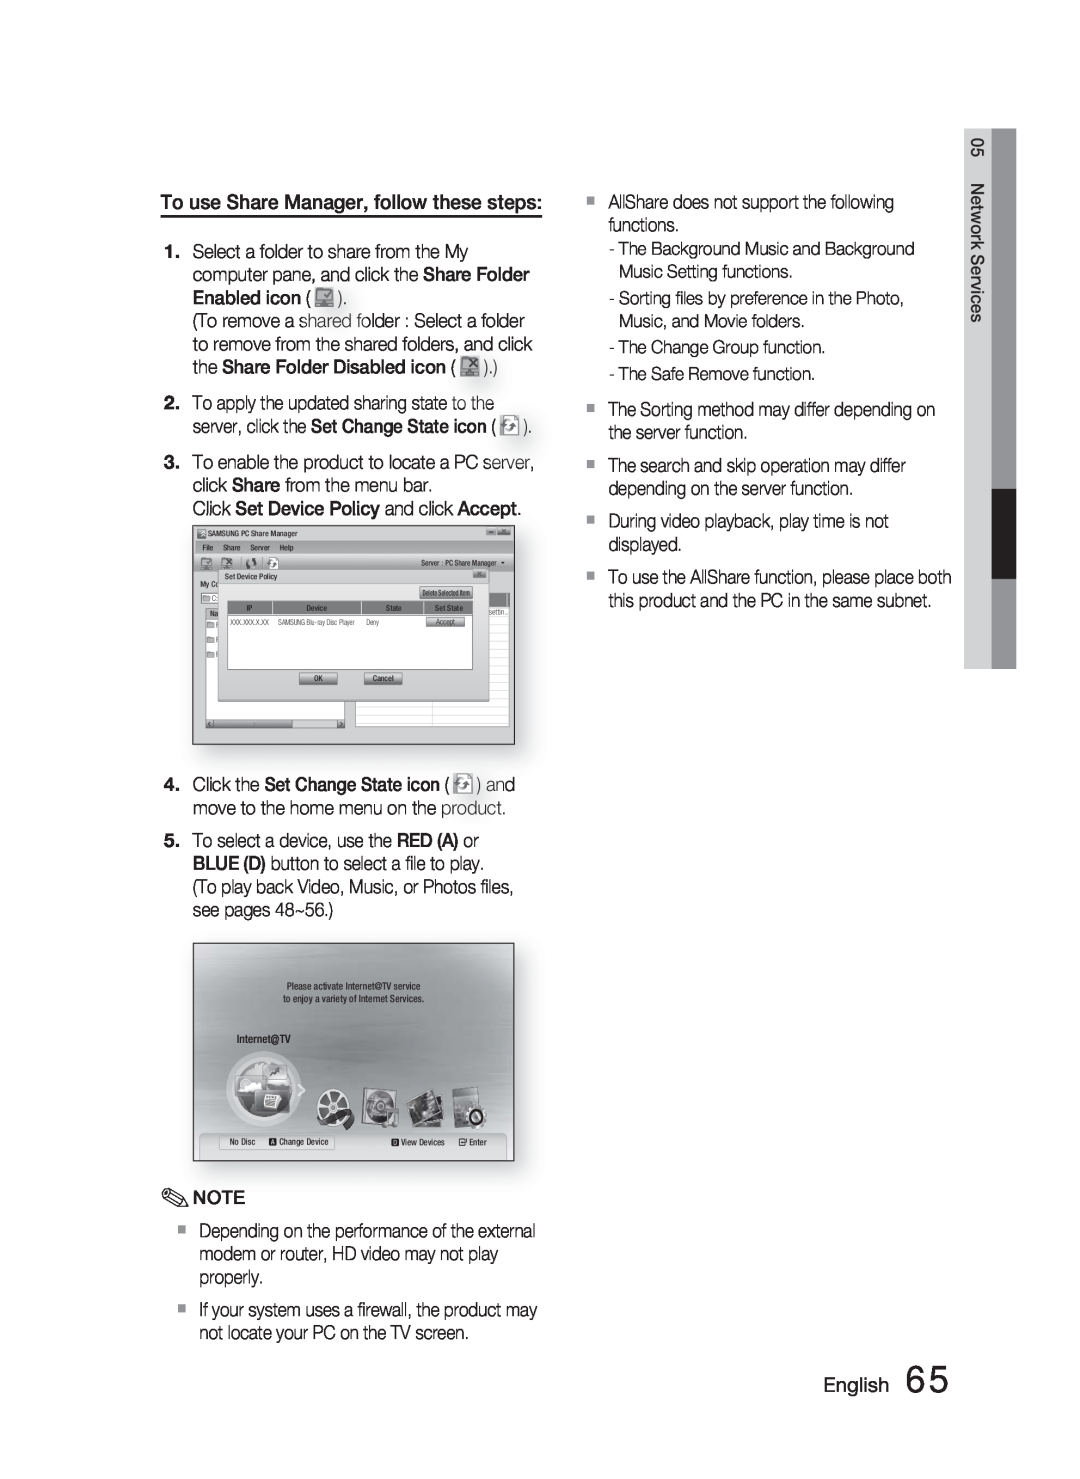 Samsung AH68-02279Y user manual To use Share Manager, follow these steps, English 